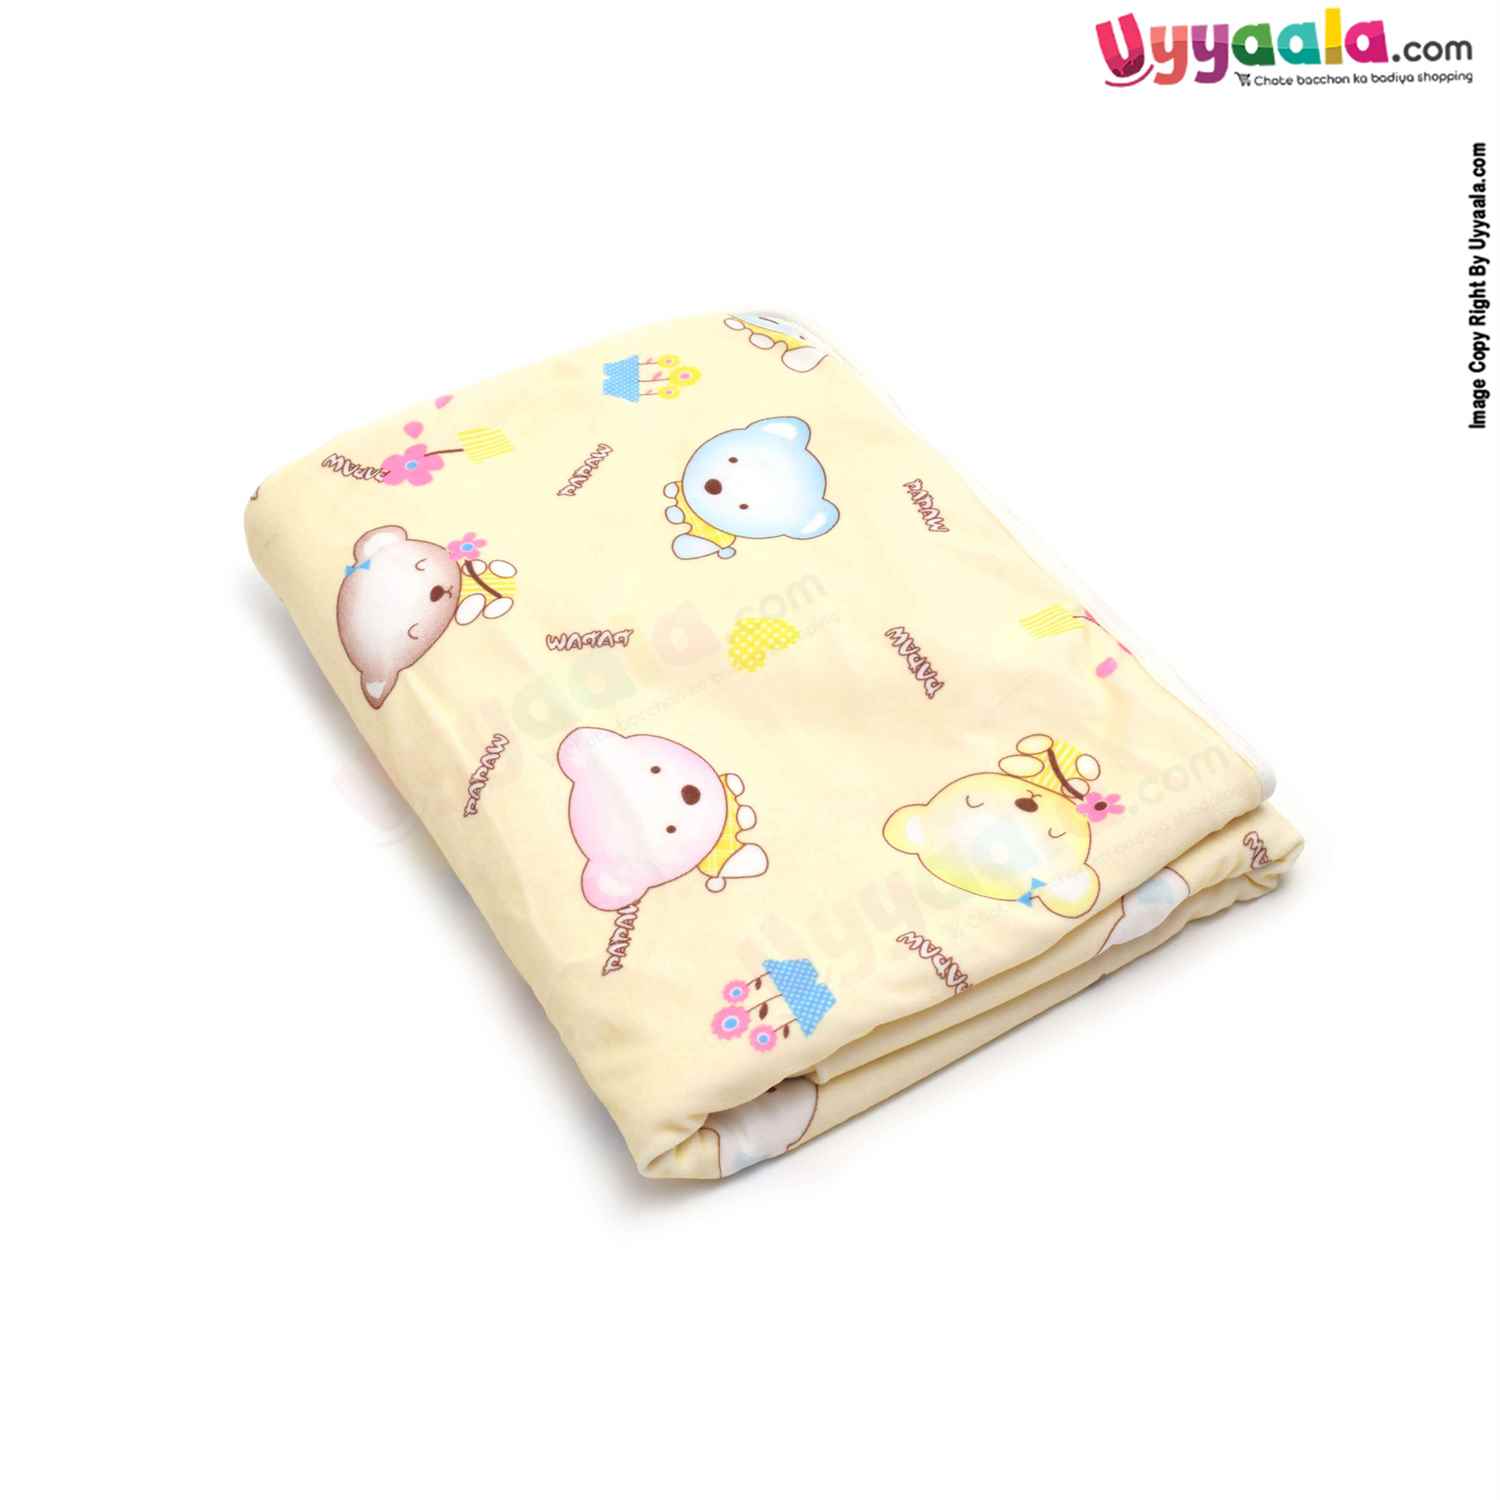 Double Layered (2 Ply) Hooded Blanket One Side Fur & Another Side Velvet with Teddy & Flowers Print for Babies 0-24m Age, Size(74*74cm)- Light Yellow